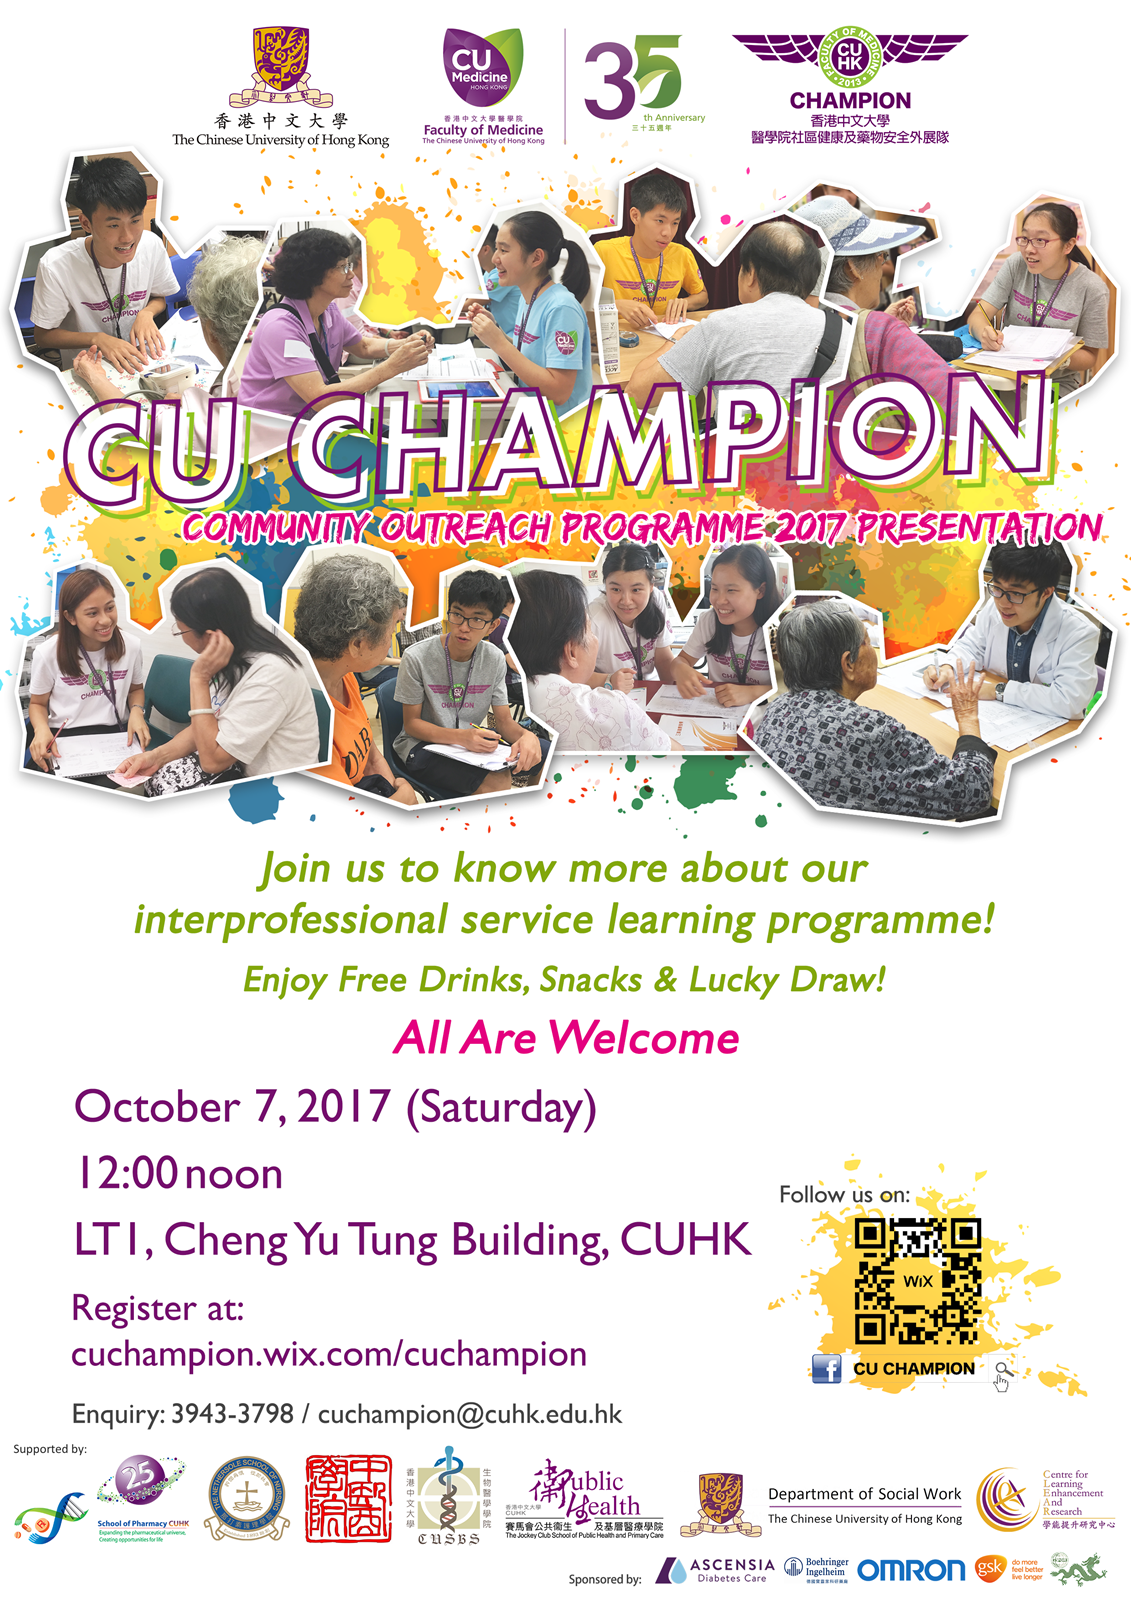 CU CHAMPION Community Outreach Programme 2017 Presentation @ Lecture Theatre 1, Ground Floor, Cheng Yu Tung Building, CUHK